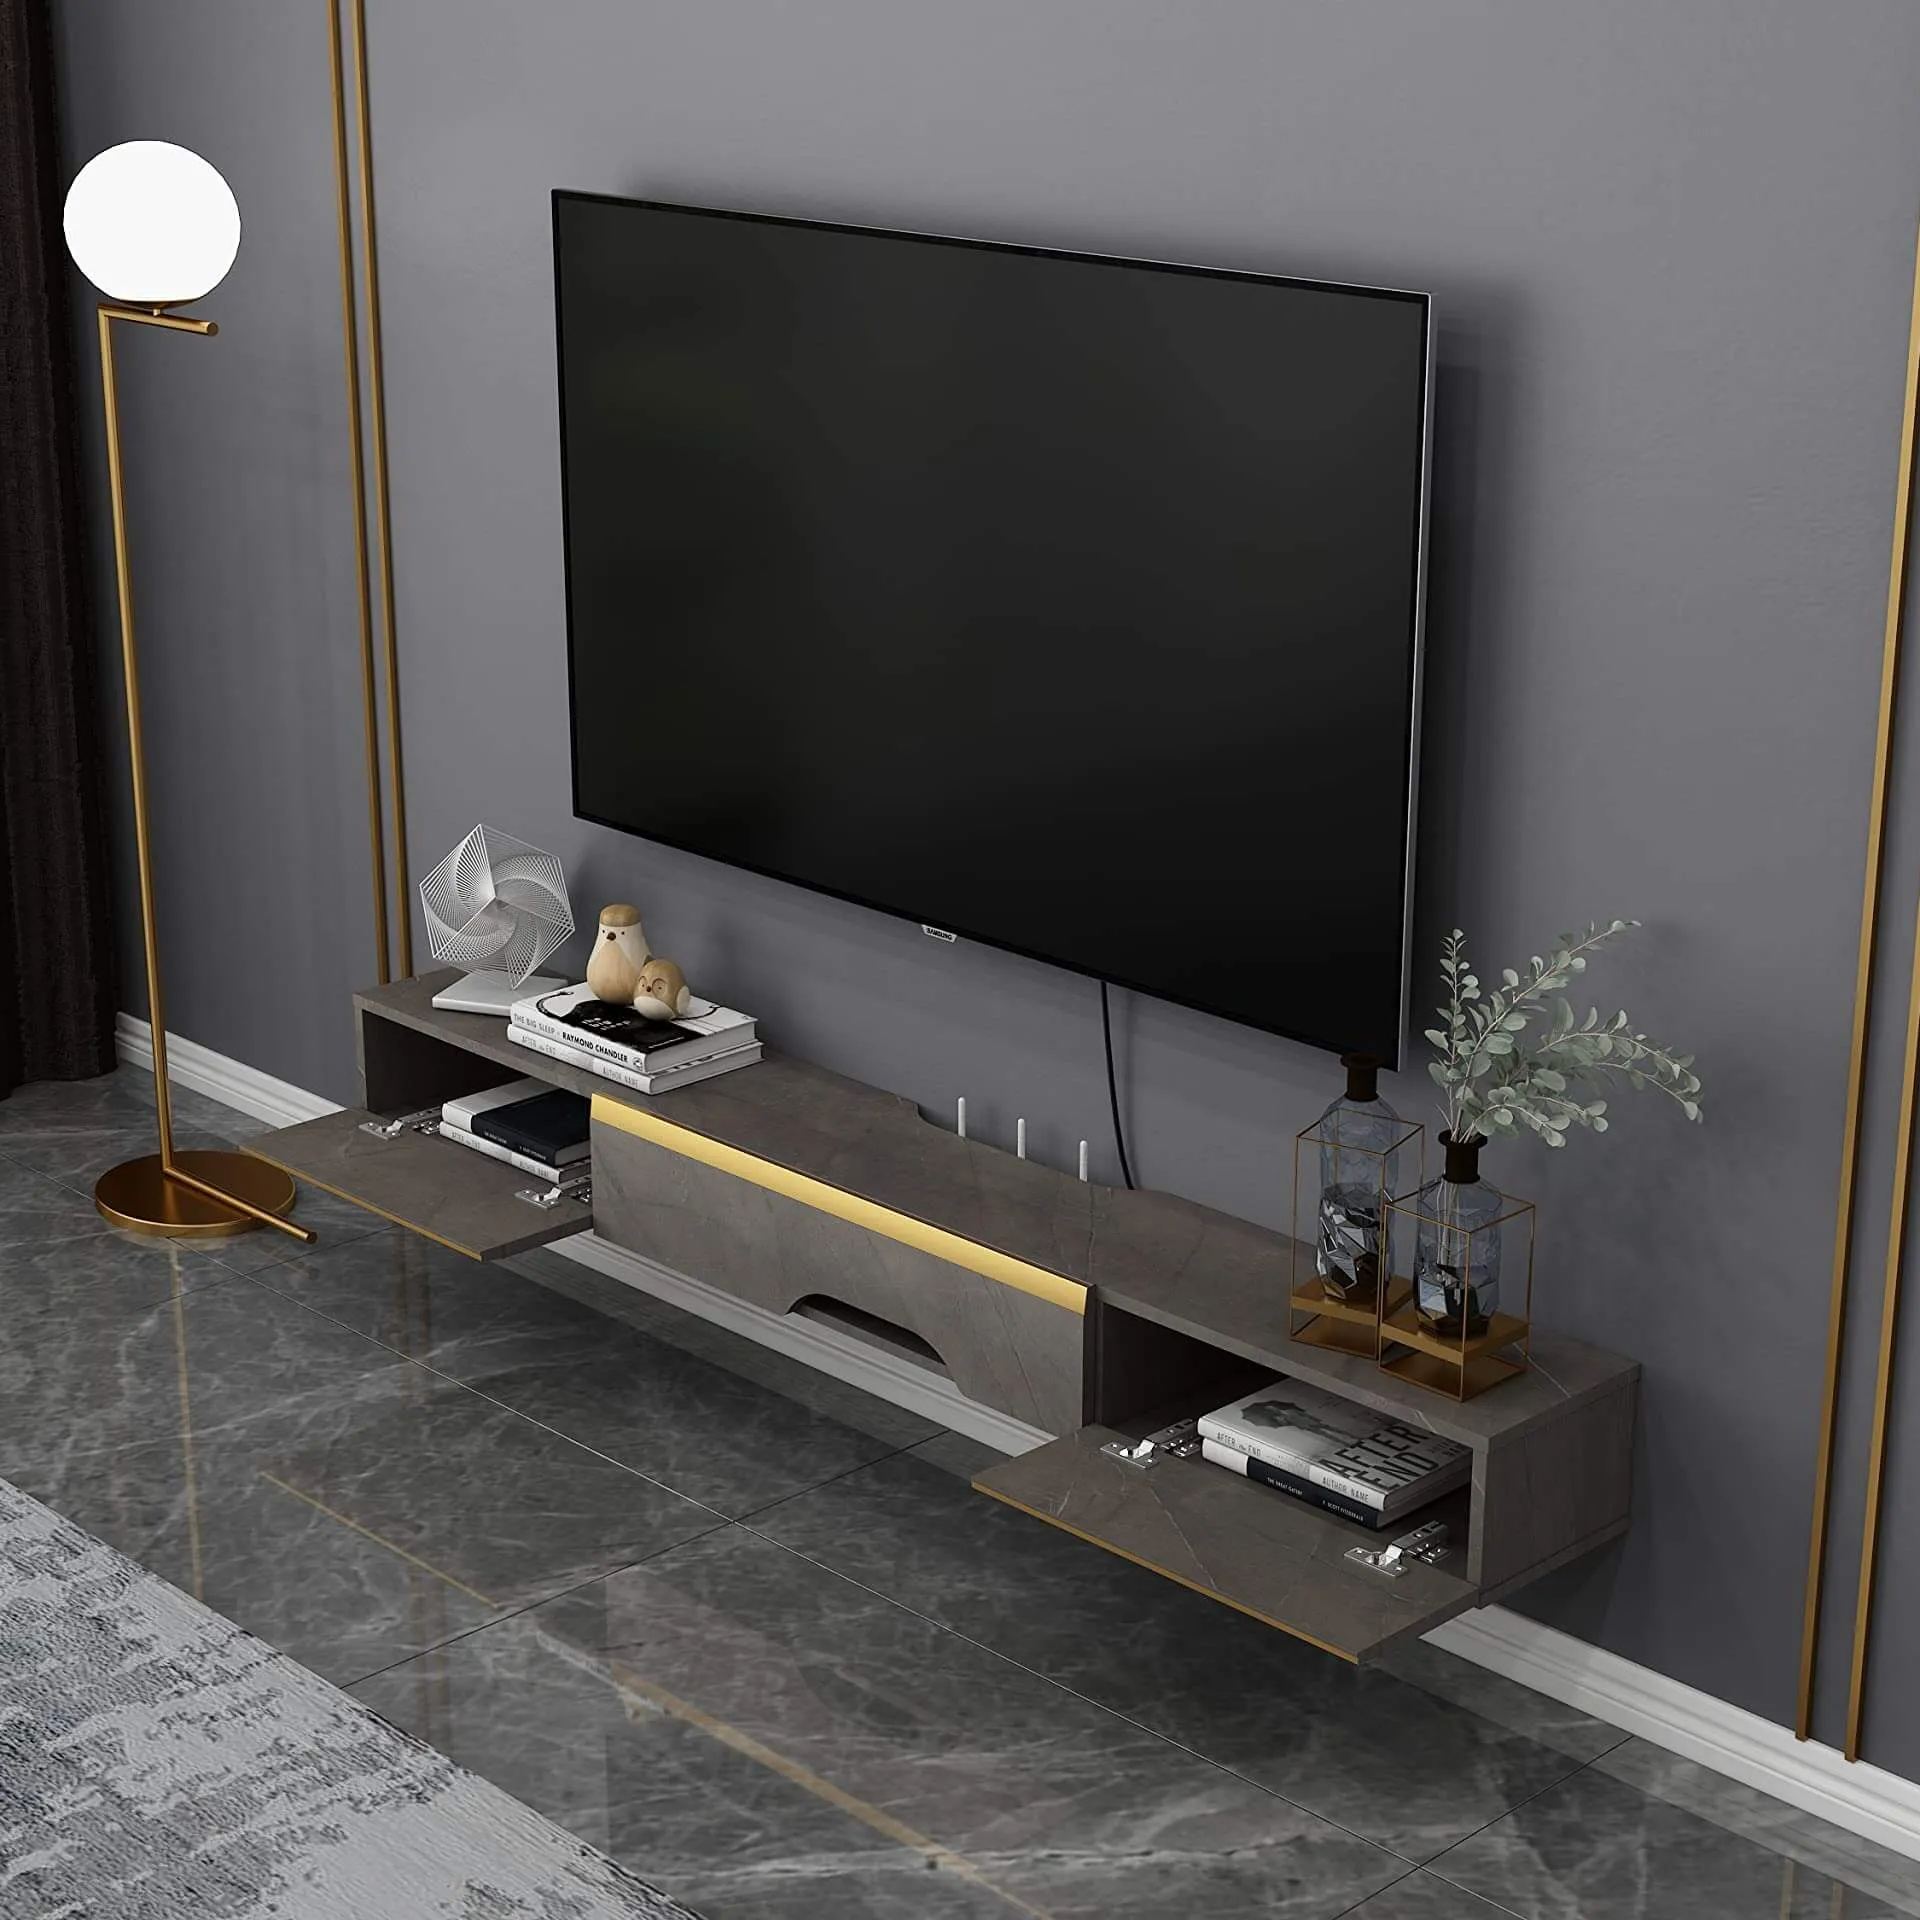 Plywood Floating TV Stand with Door Storage for 50" Televisions, Dark Grey with Golden Accent